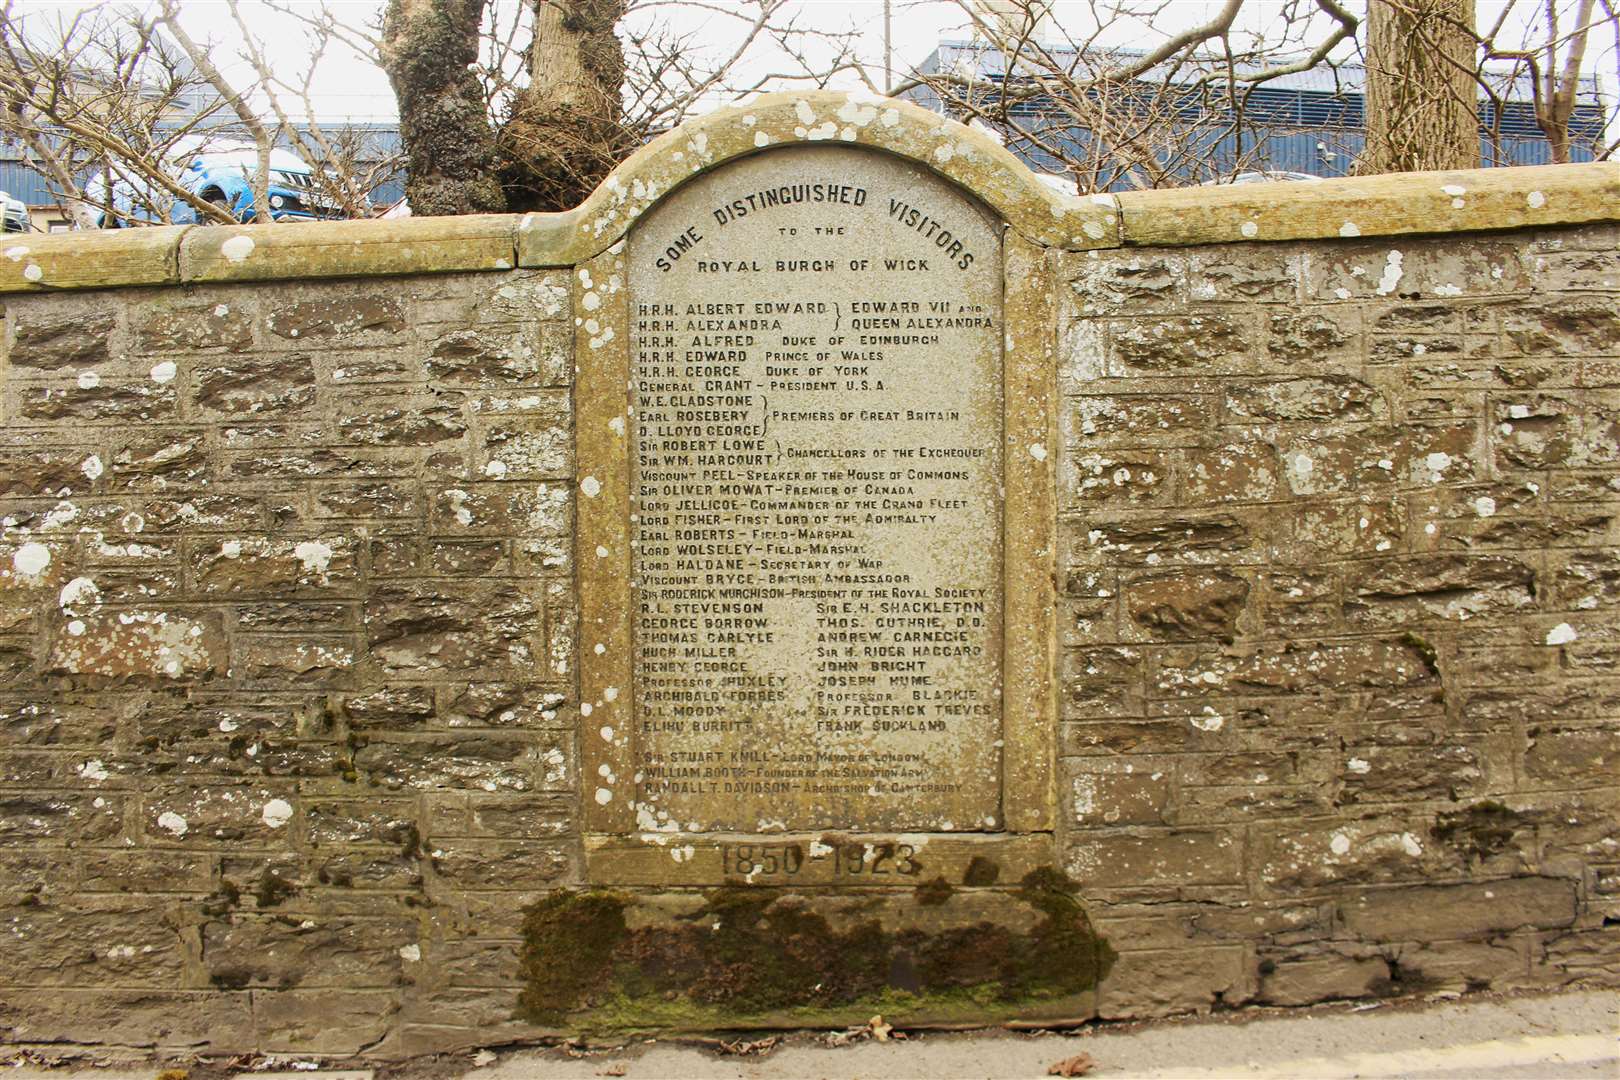 The Distinguished Visitors plaque in Station Road, Wick.